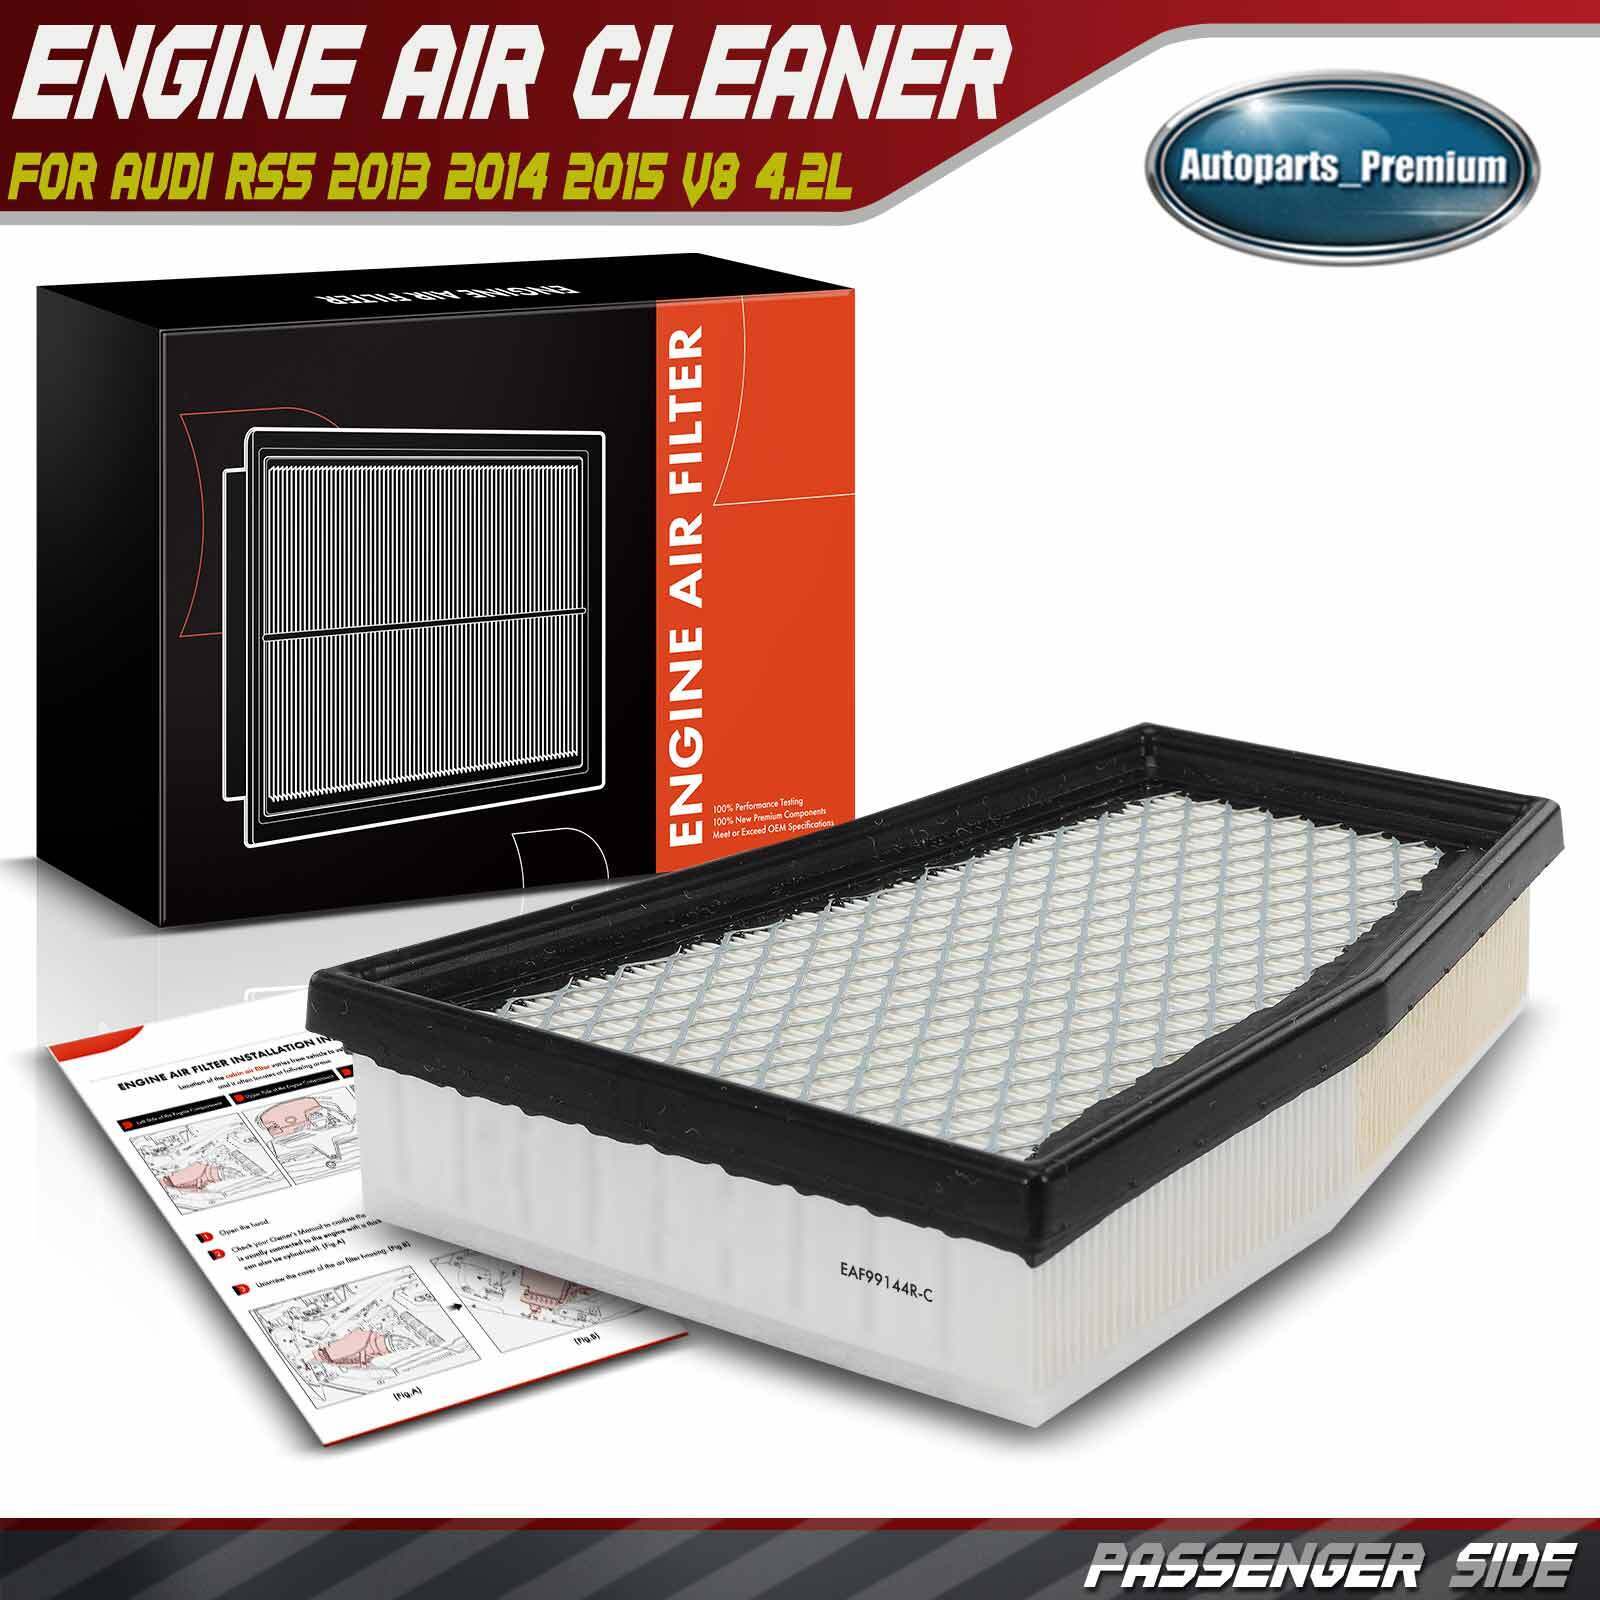 New Right Side Engine Air Filter for Audi RS5 2013 2014 2015 V8 4.2L 8T0133844A